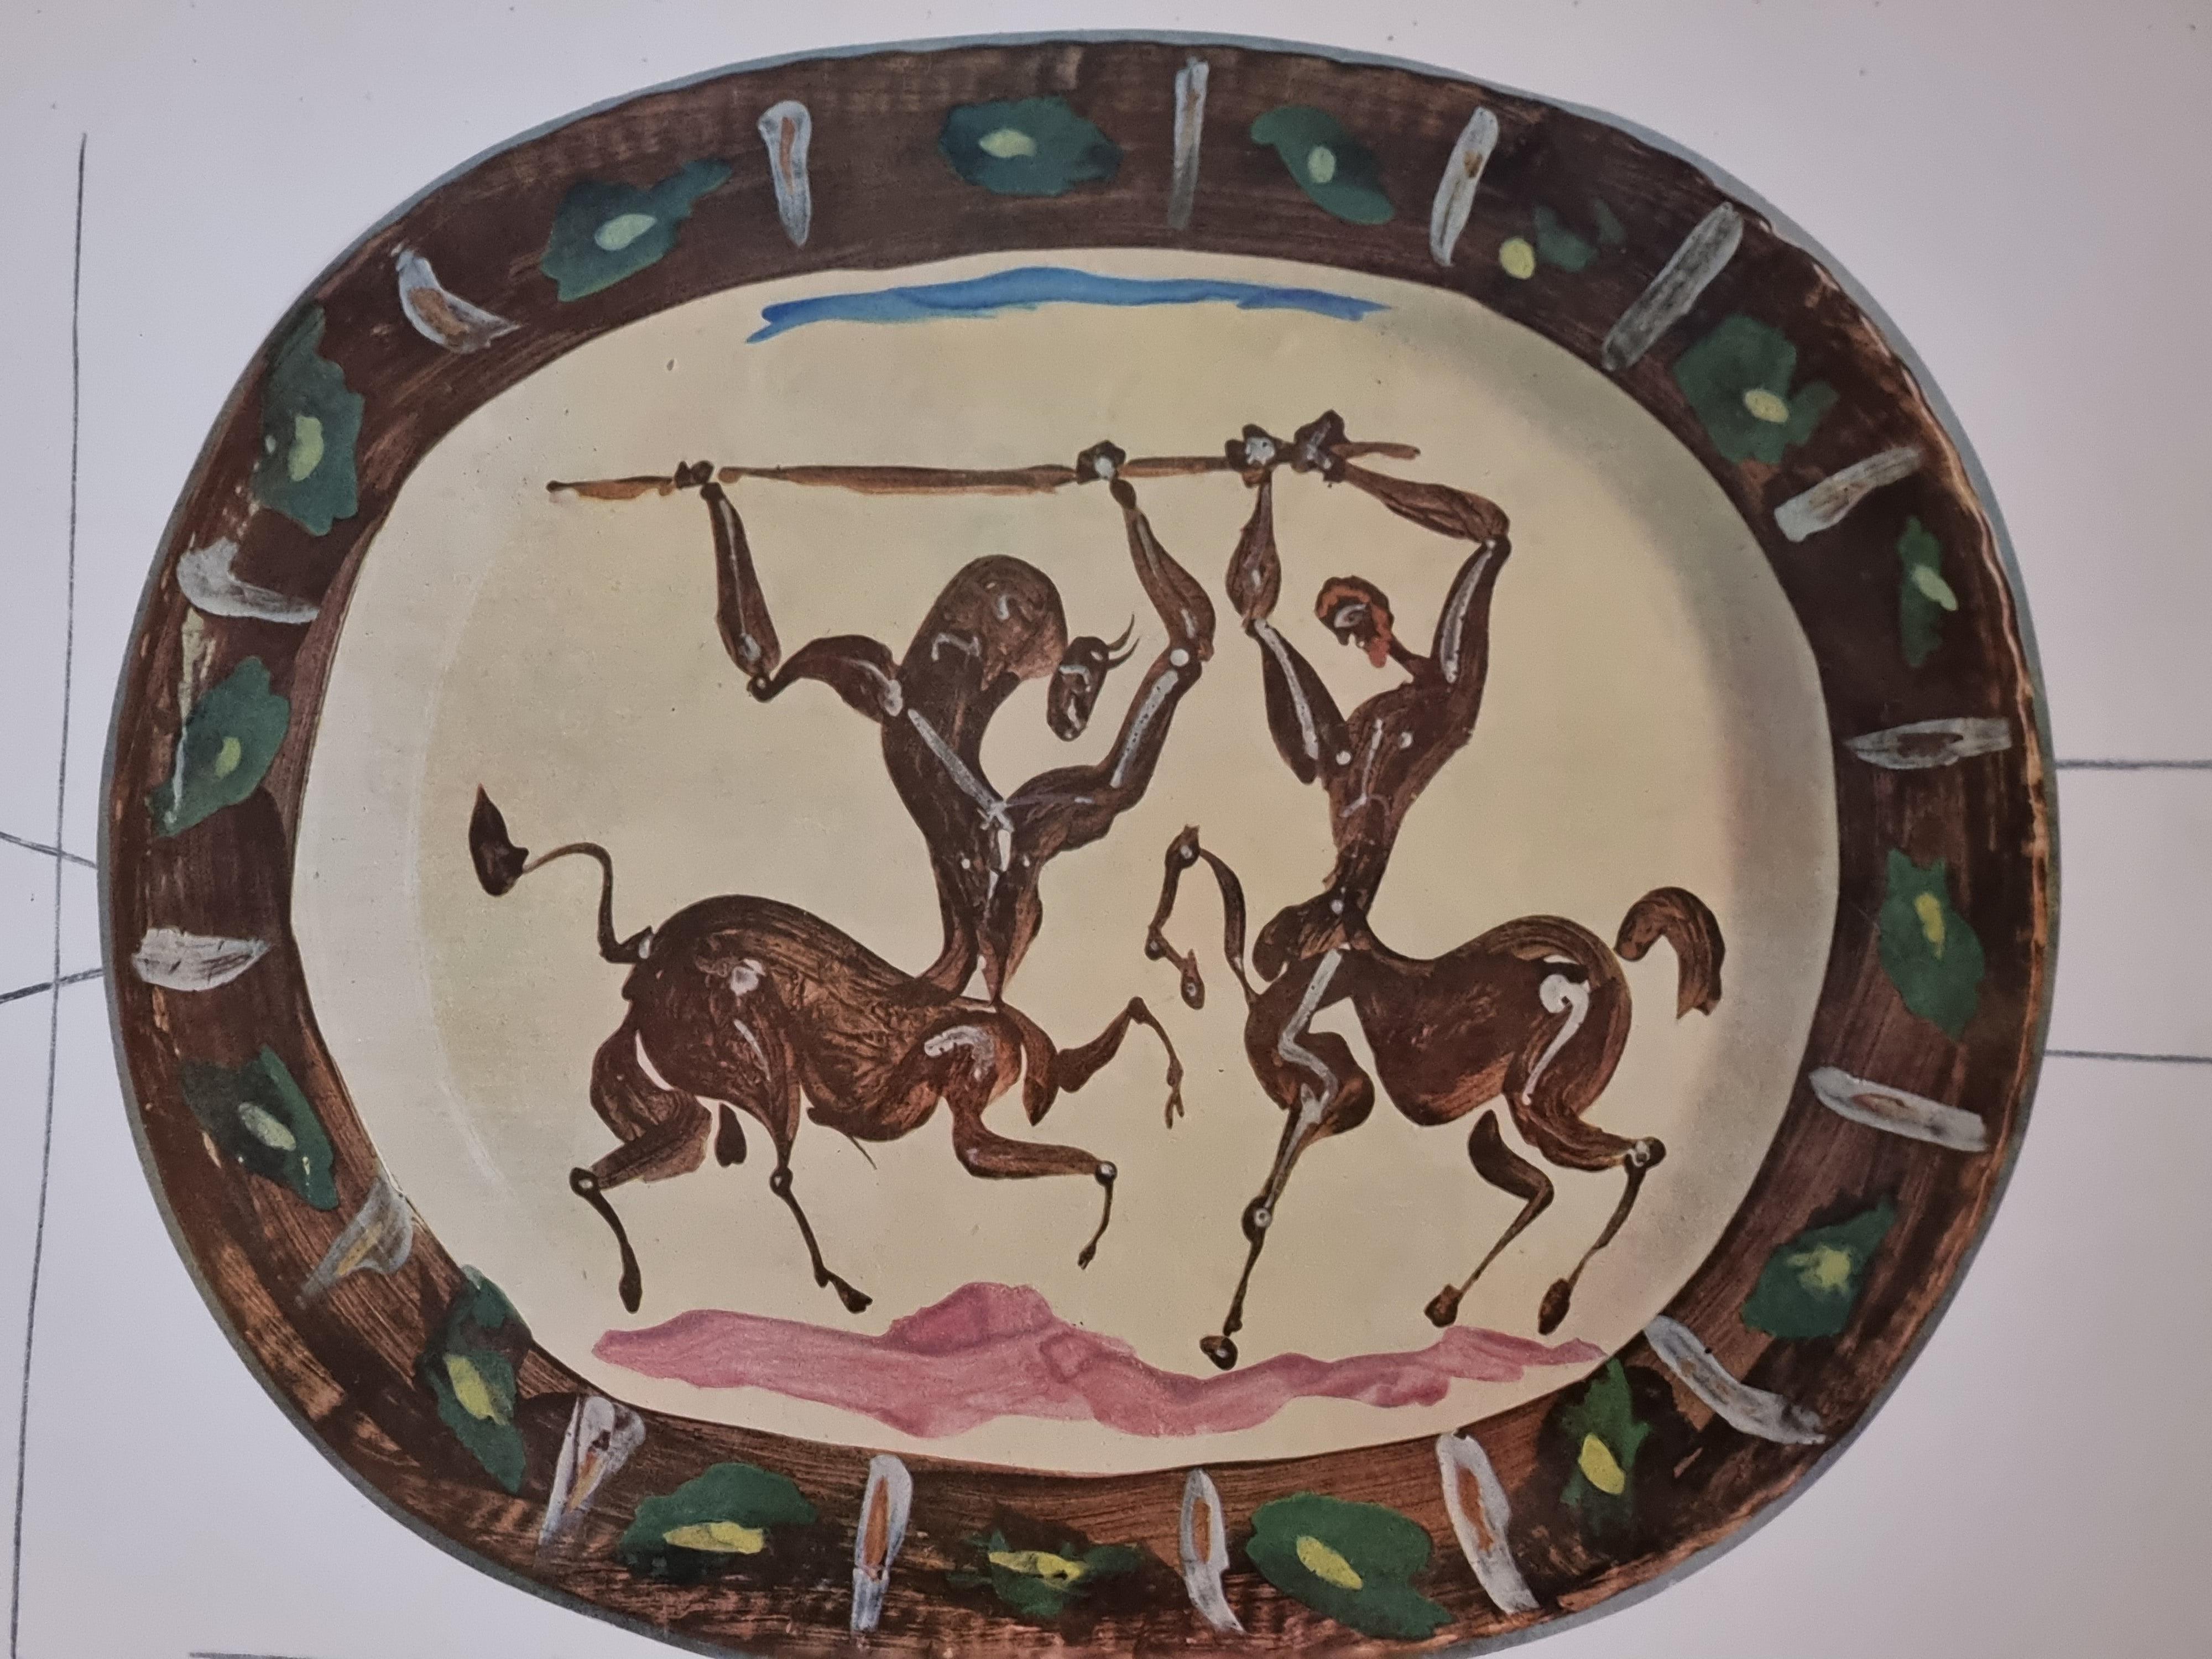 An exquisite shiny polychrome print of Picasso Vallauris ceramic plate depicting battle of Centaurs. The color print is attached to a thick, high quality paper with decorative lines. 

The print is originally from a Limited Edition Art Folio